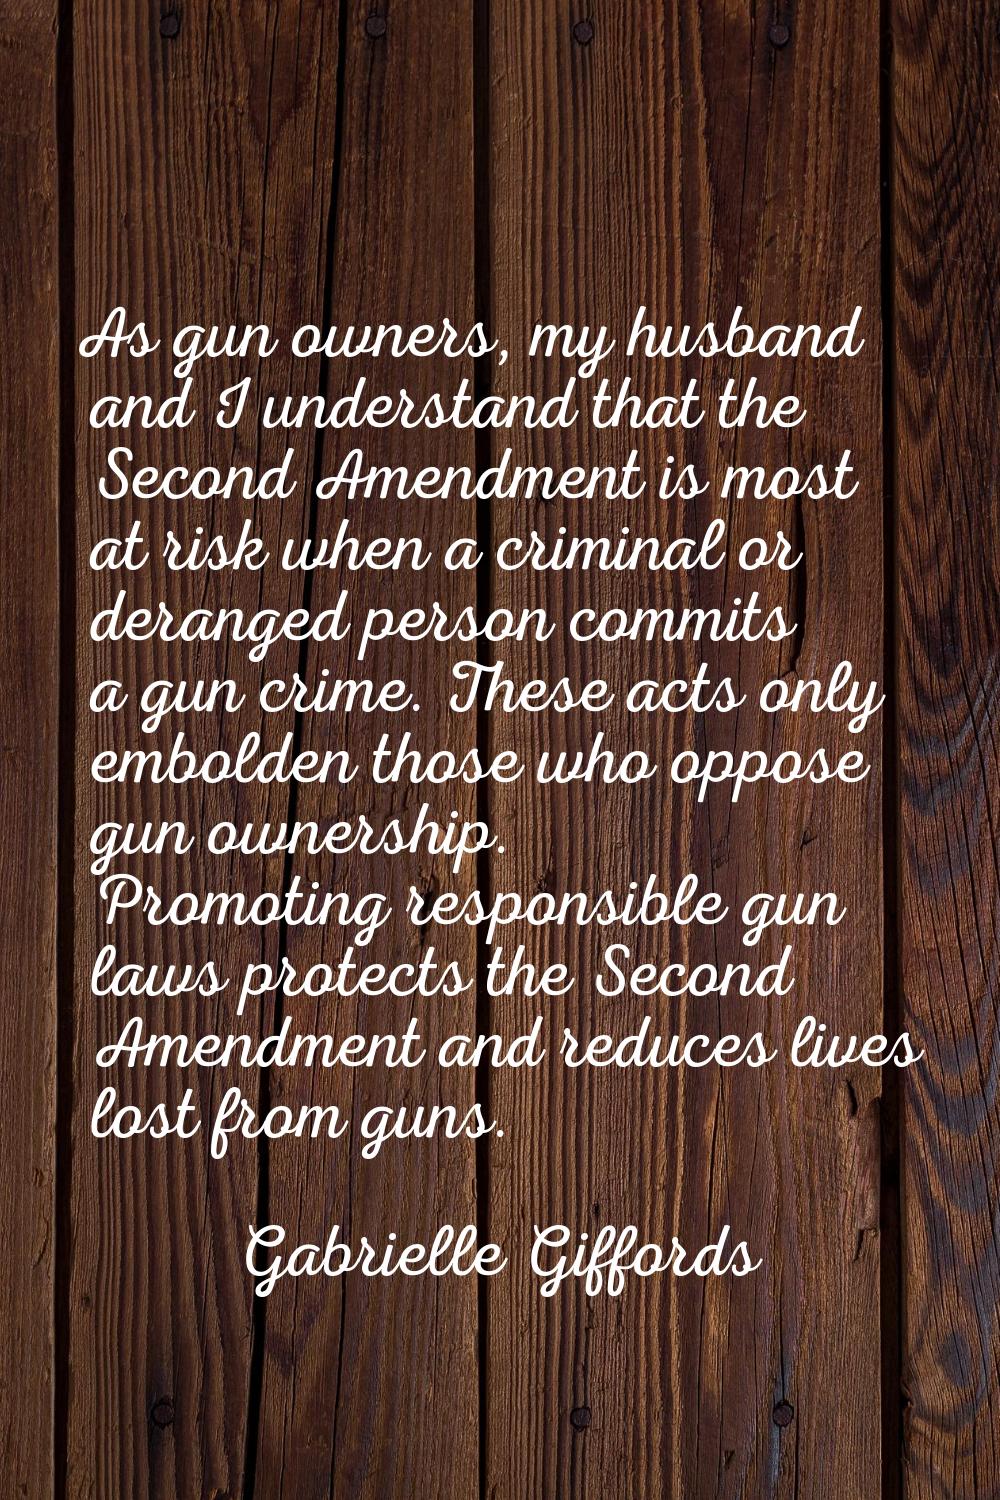 As gun owners, my husband and I understand that the Second Amendment is most at risk when a crimina